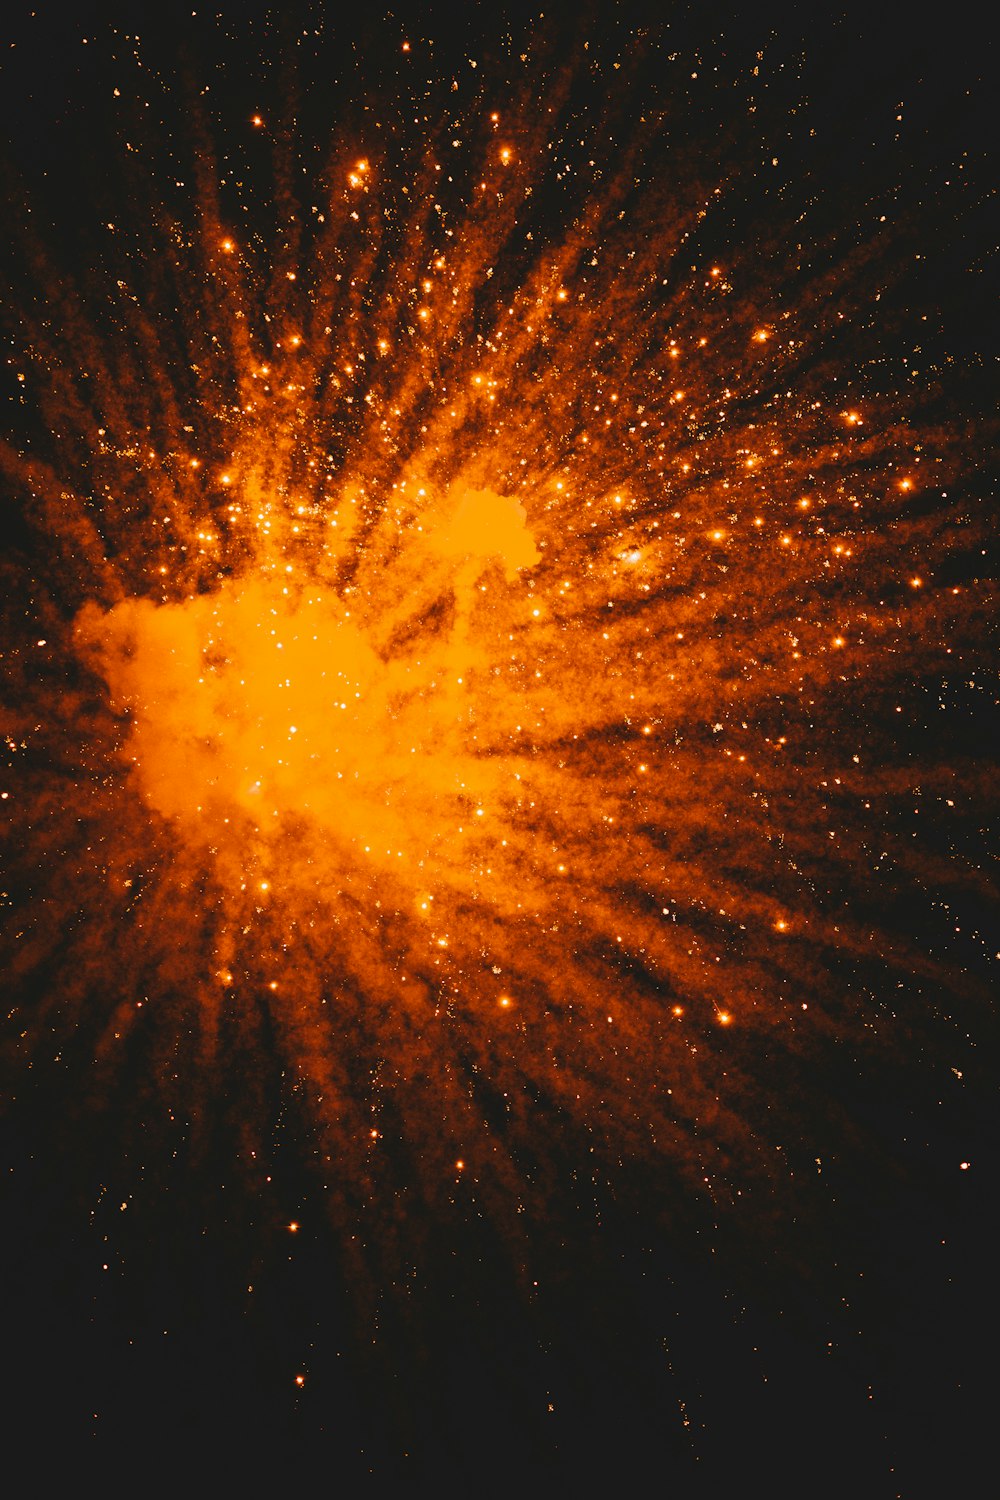 an orange and yellow star burst in the night sky